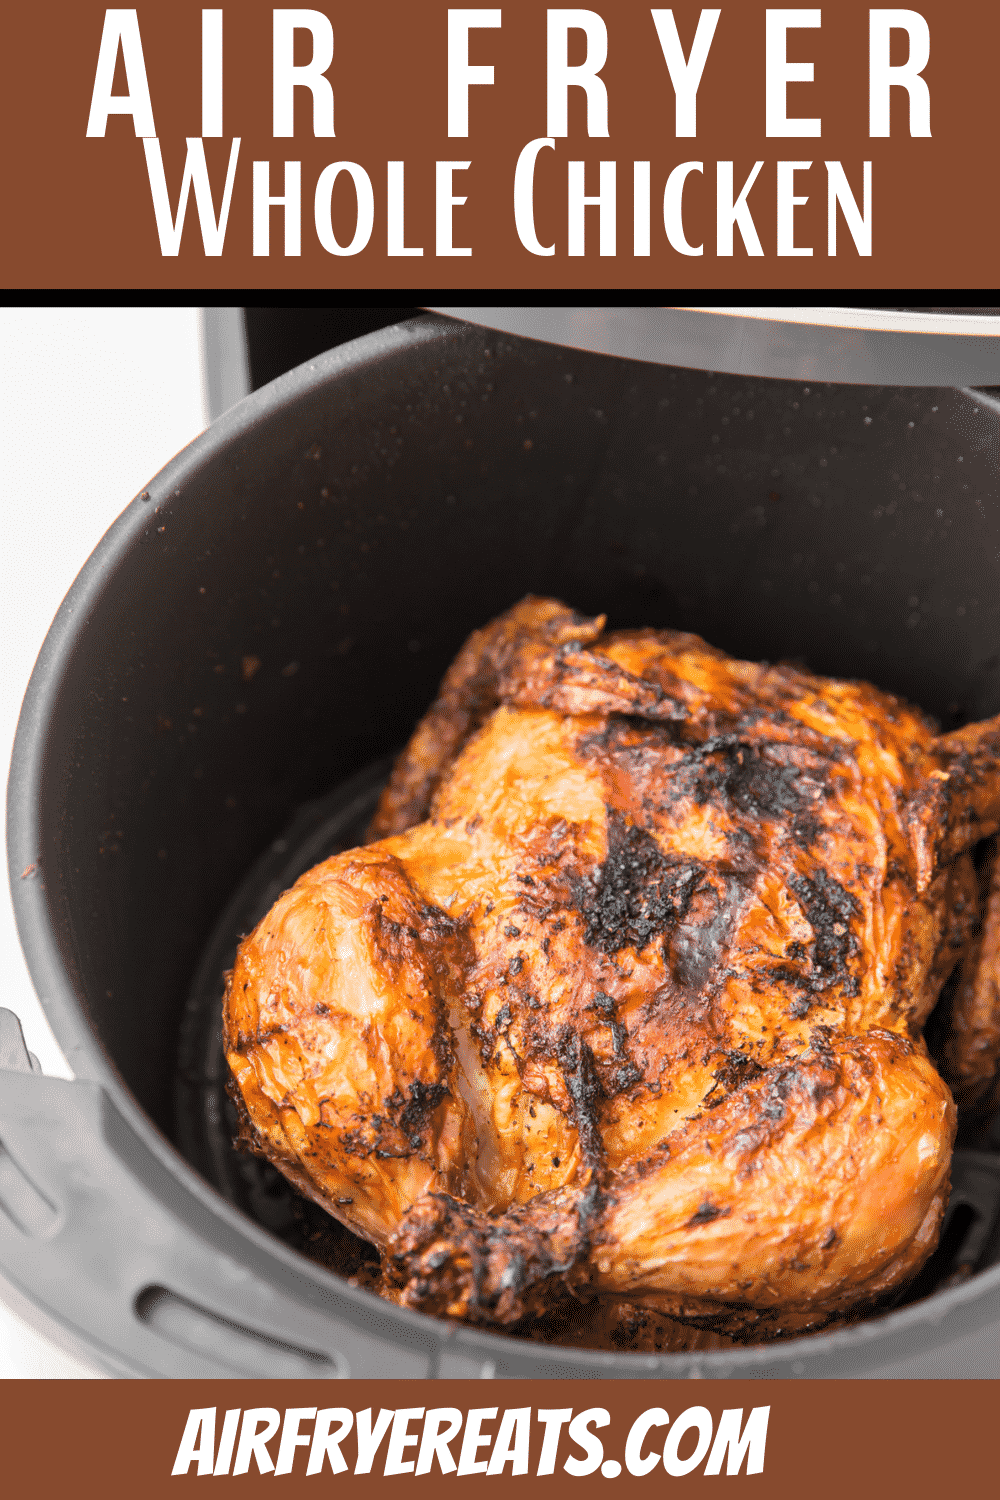 This Air Fryer Whole Chicken recipe makes the most succulent roasted chicken in less than an hour! Skip the rotisserie chicken and make this at home with a few simple spices. #airfryerwholechicken #airfryerchicken via @vegetarianmamma